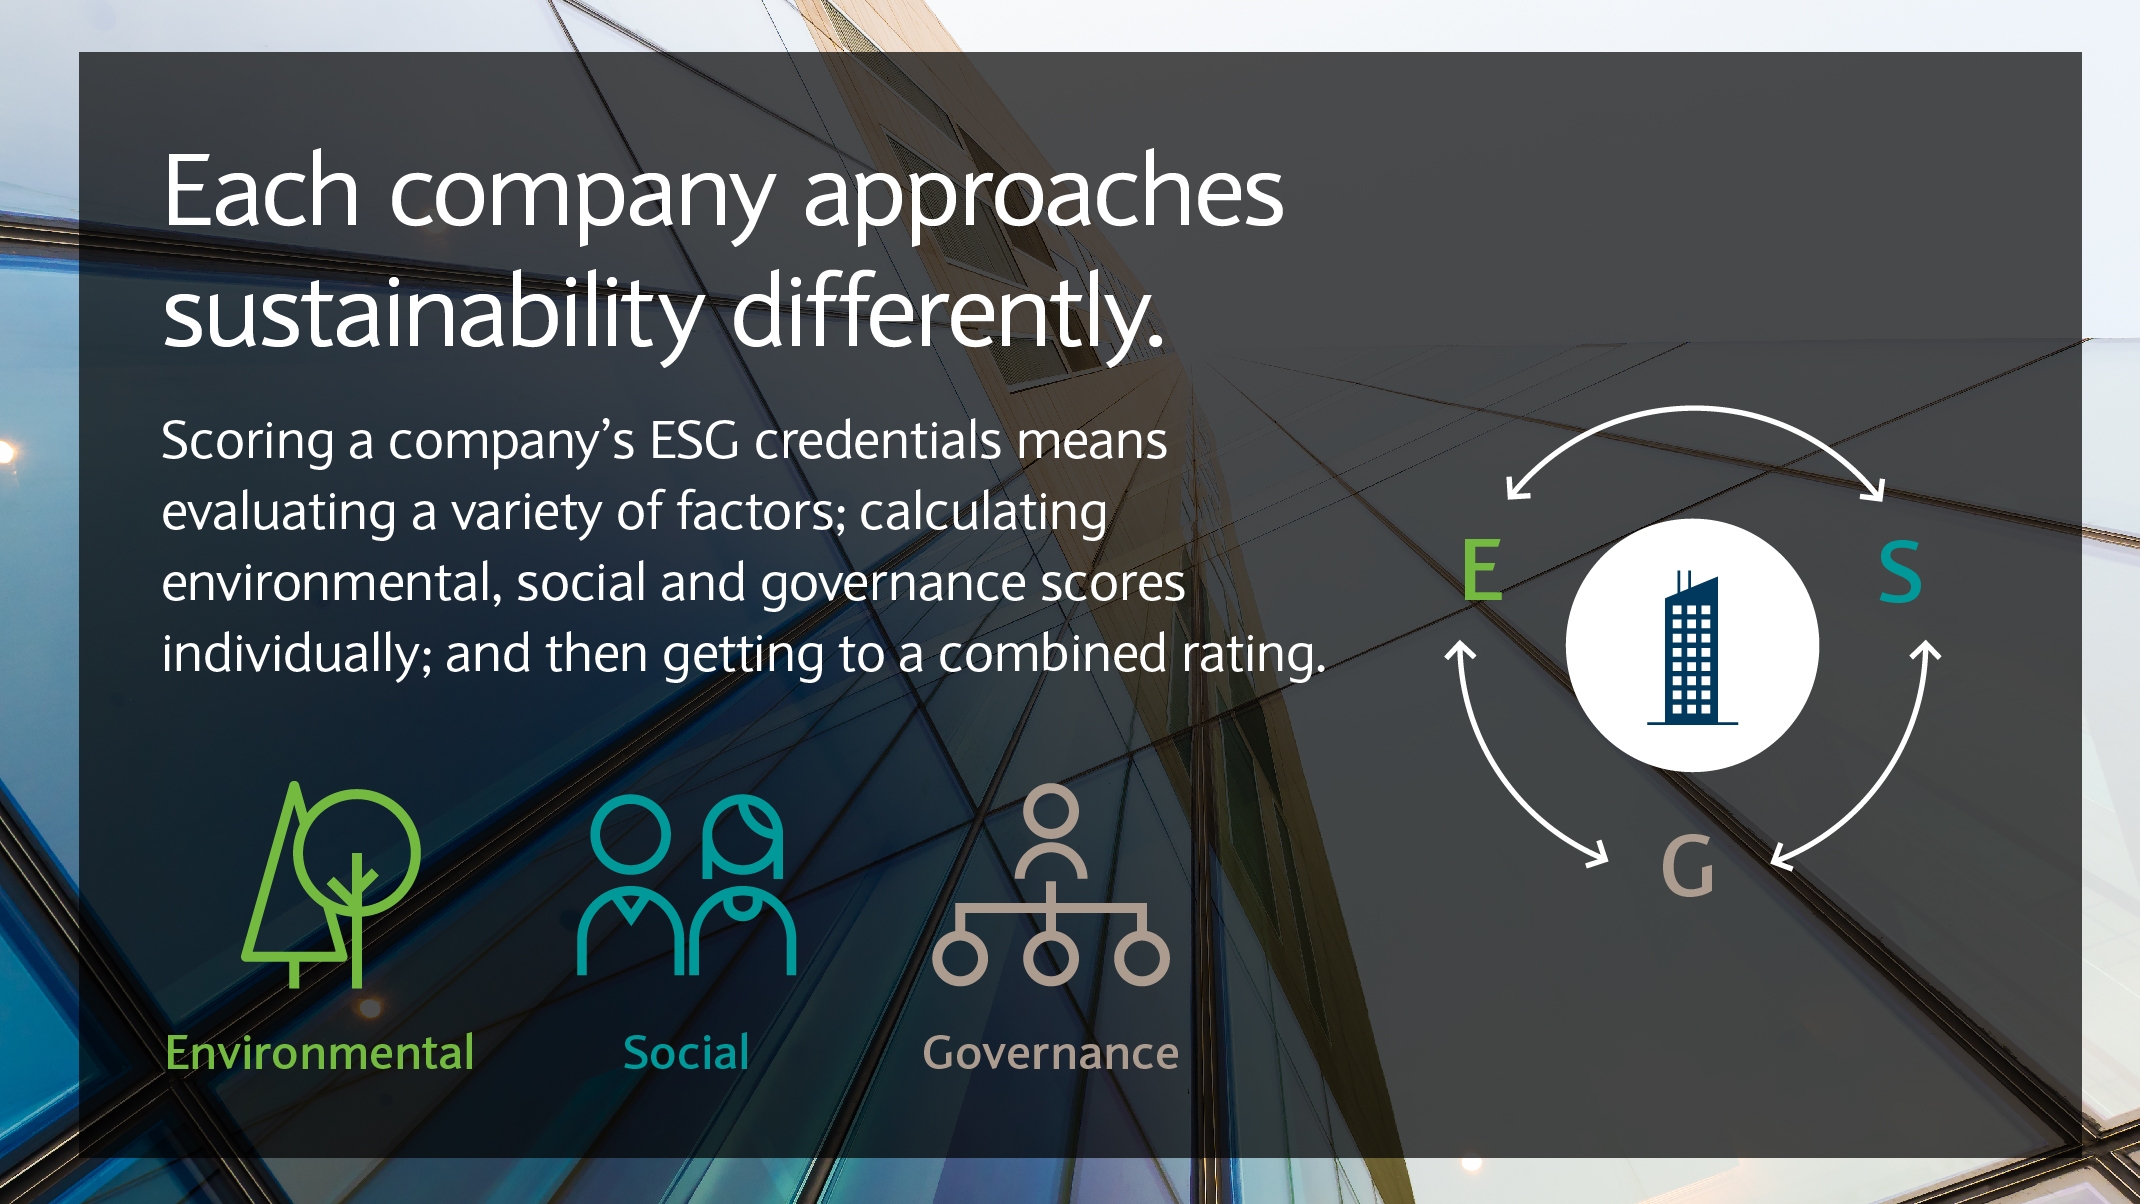 Each company approaches sustainability differently. Scoring a company's ESG credentials means evaluating a variety of factors